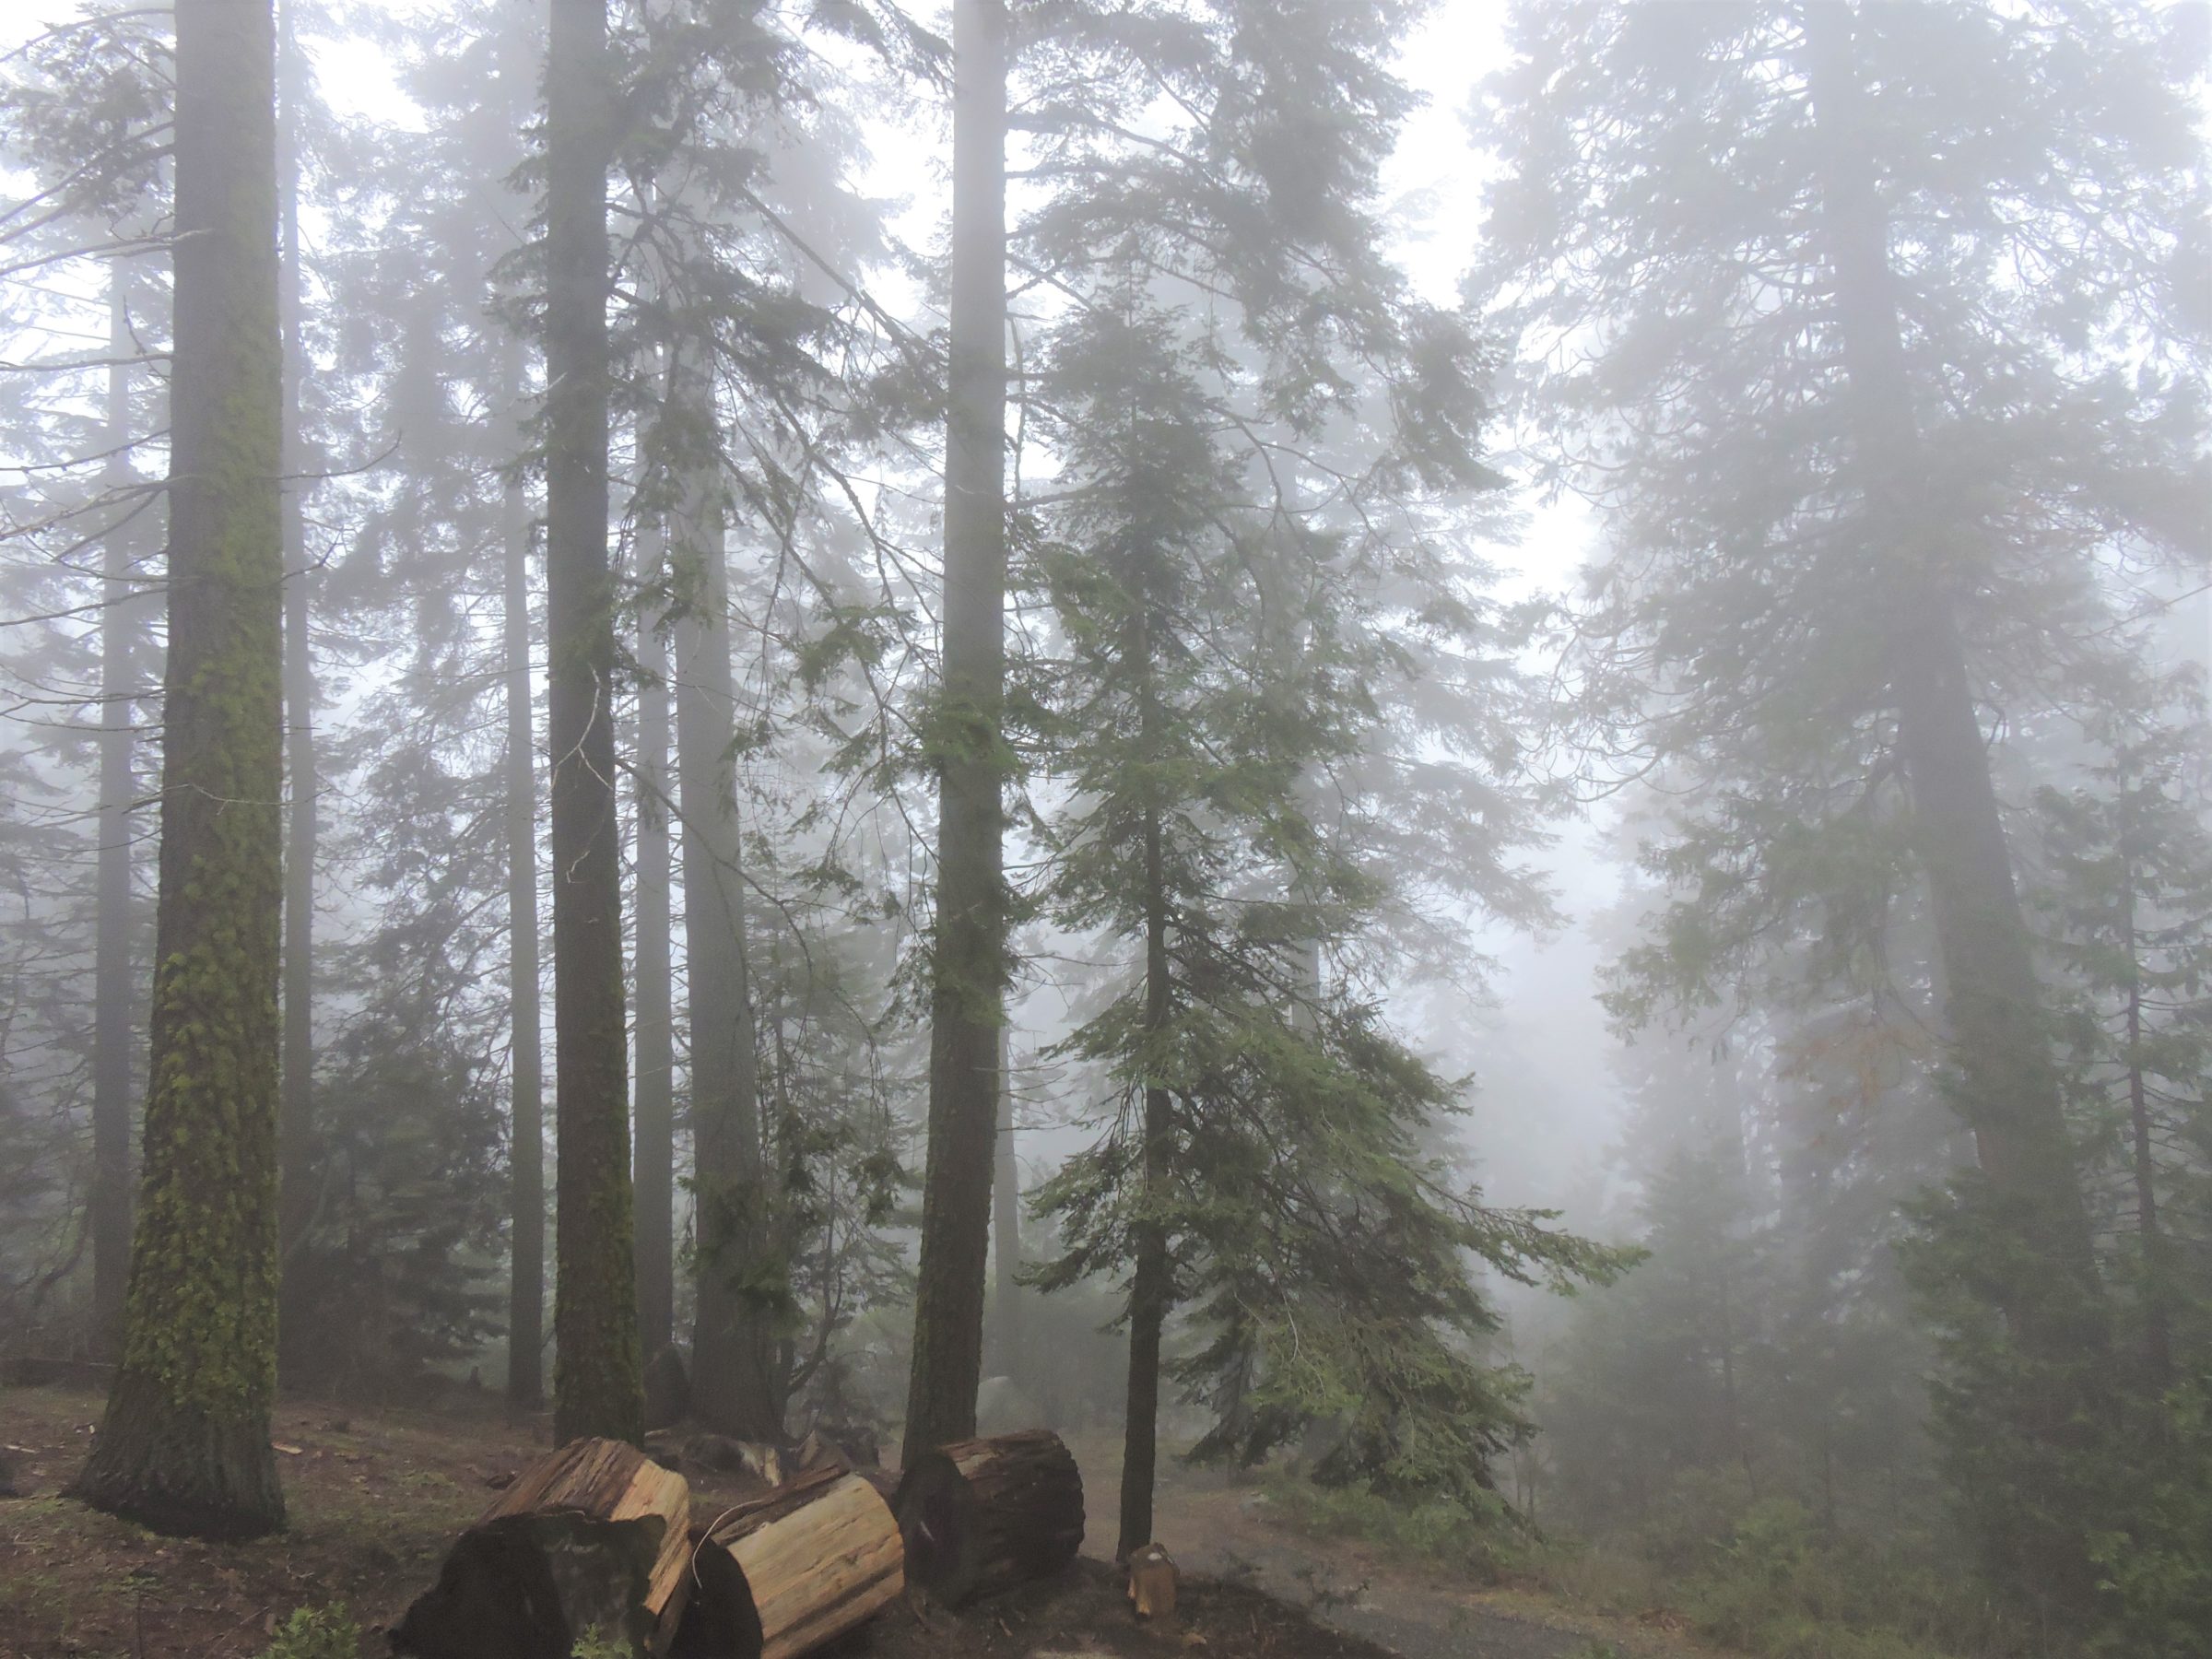 Foggy forest in Sequoia National Park